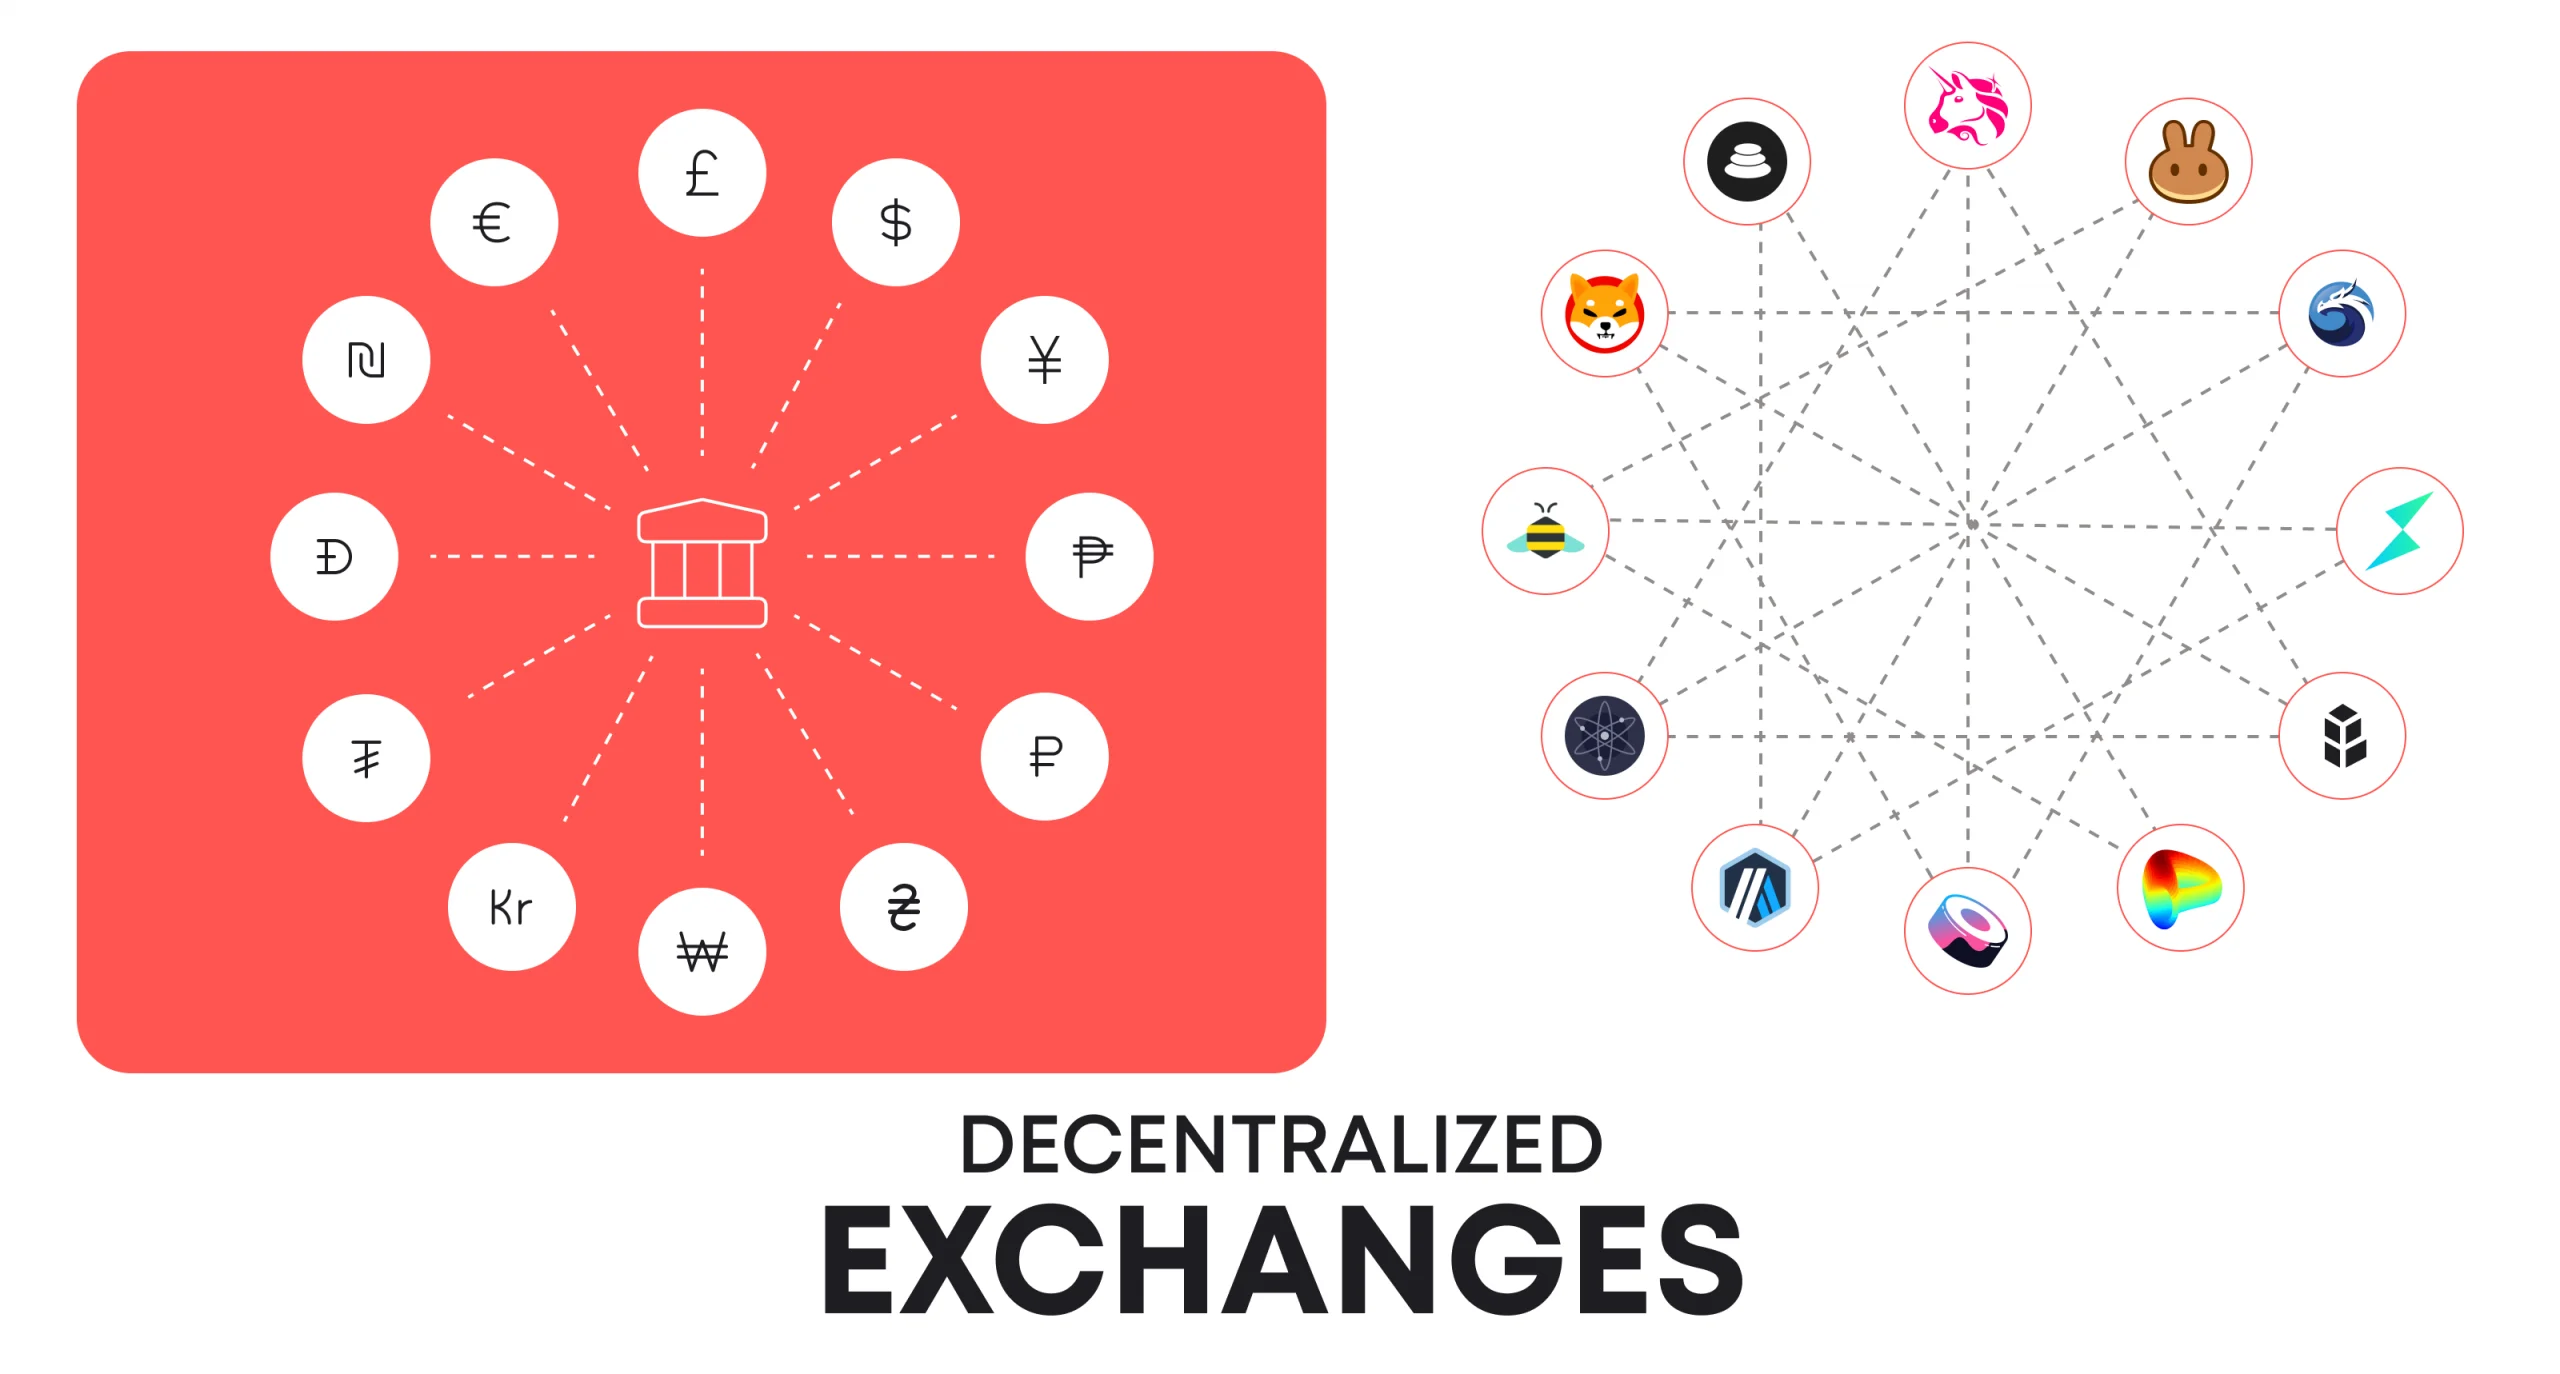 Decentralized exchanges revolutionize the trading landscape by utilizing blockchain technology to implement direct asset exchanges within a distributed ledger framework